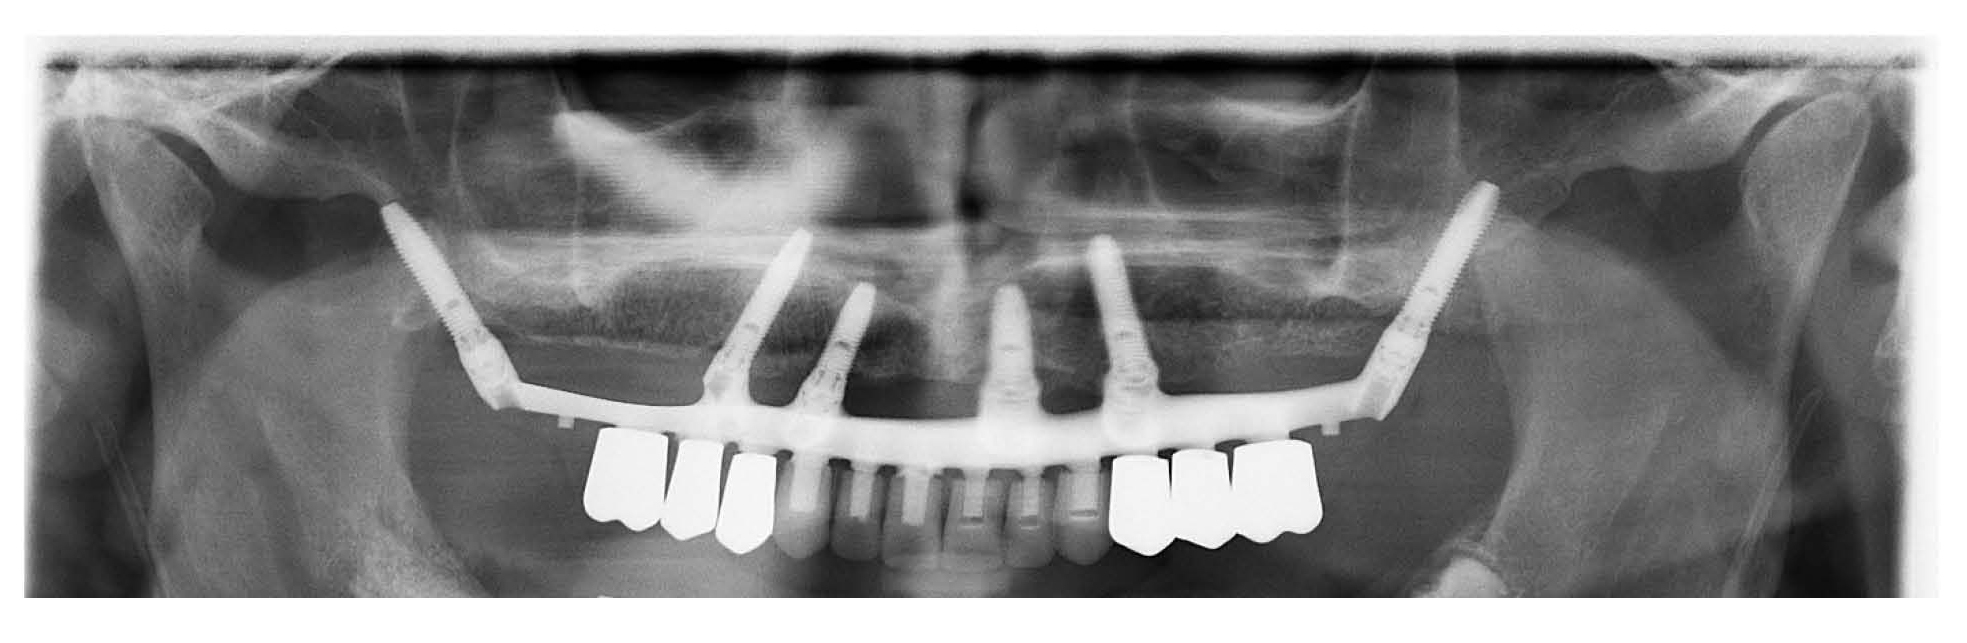 Accelerset implant supported permanent prosthesis shows how each tooth is an individual unit